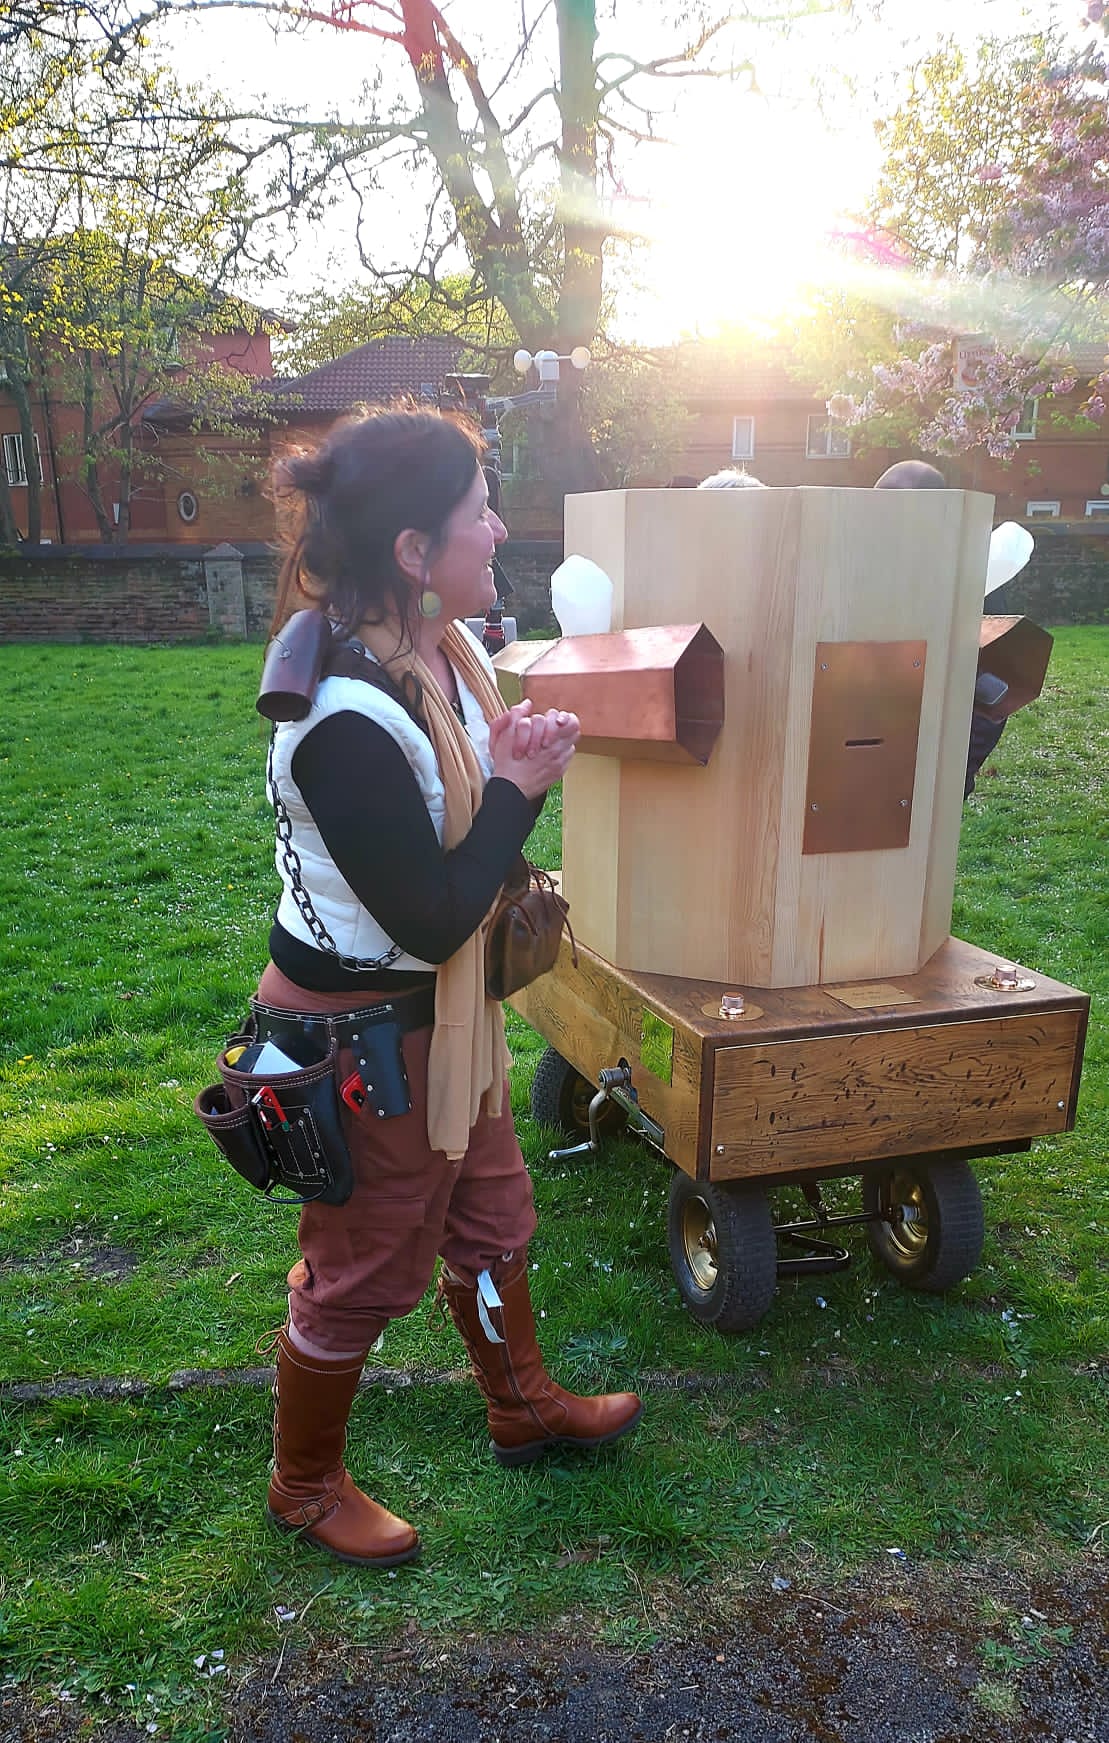 Rachel dressed in brown bloomers, brown boots, a large tool belt around her waist, a white gilet, black arms and a beige scarf. Future Machine with plastic milk bottle lights attached to both side and the top, light coming through the trees behind